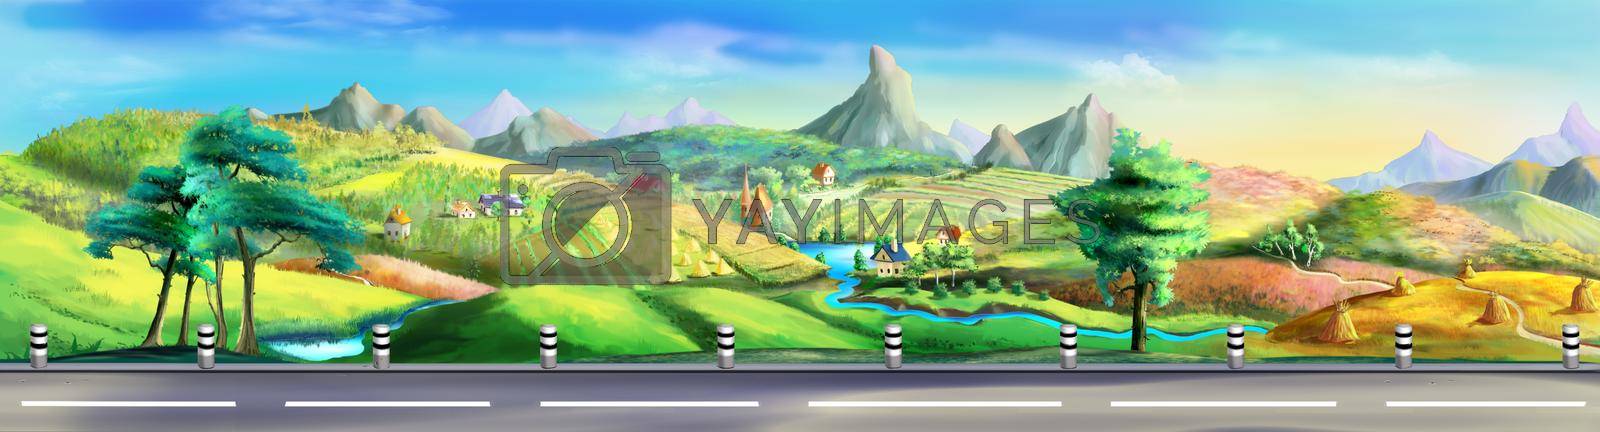 Royalty free image of Scenic road through the mountains illustration by Multipedia